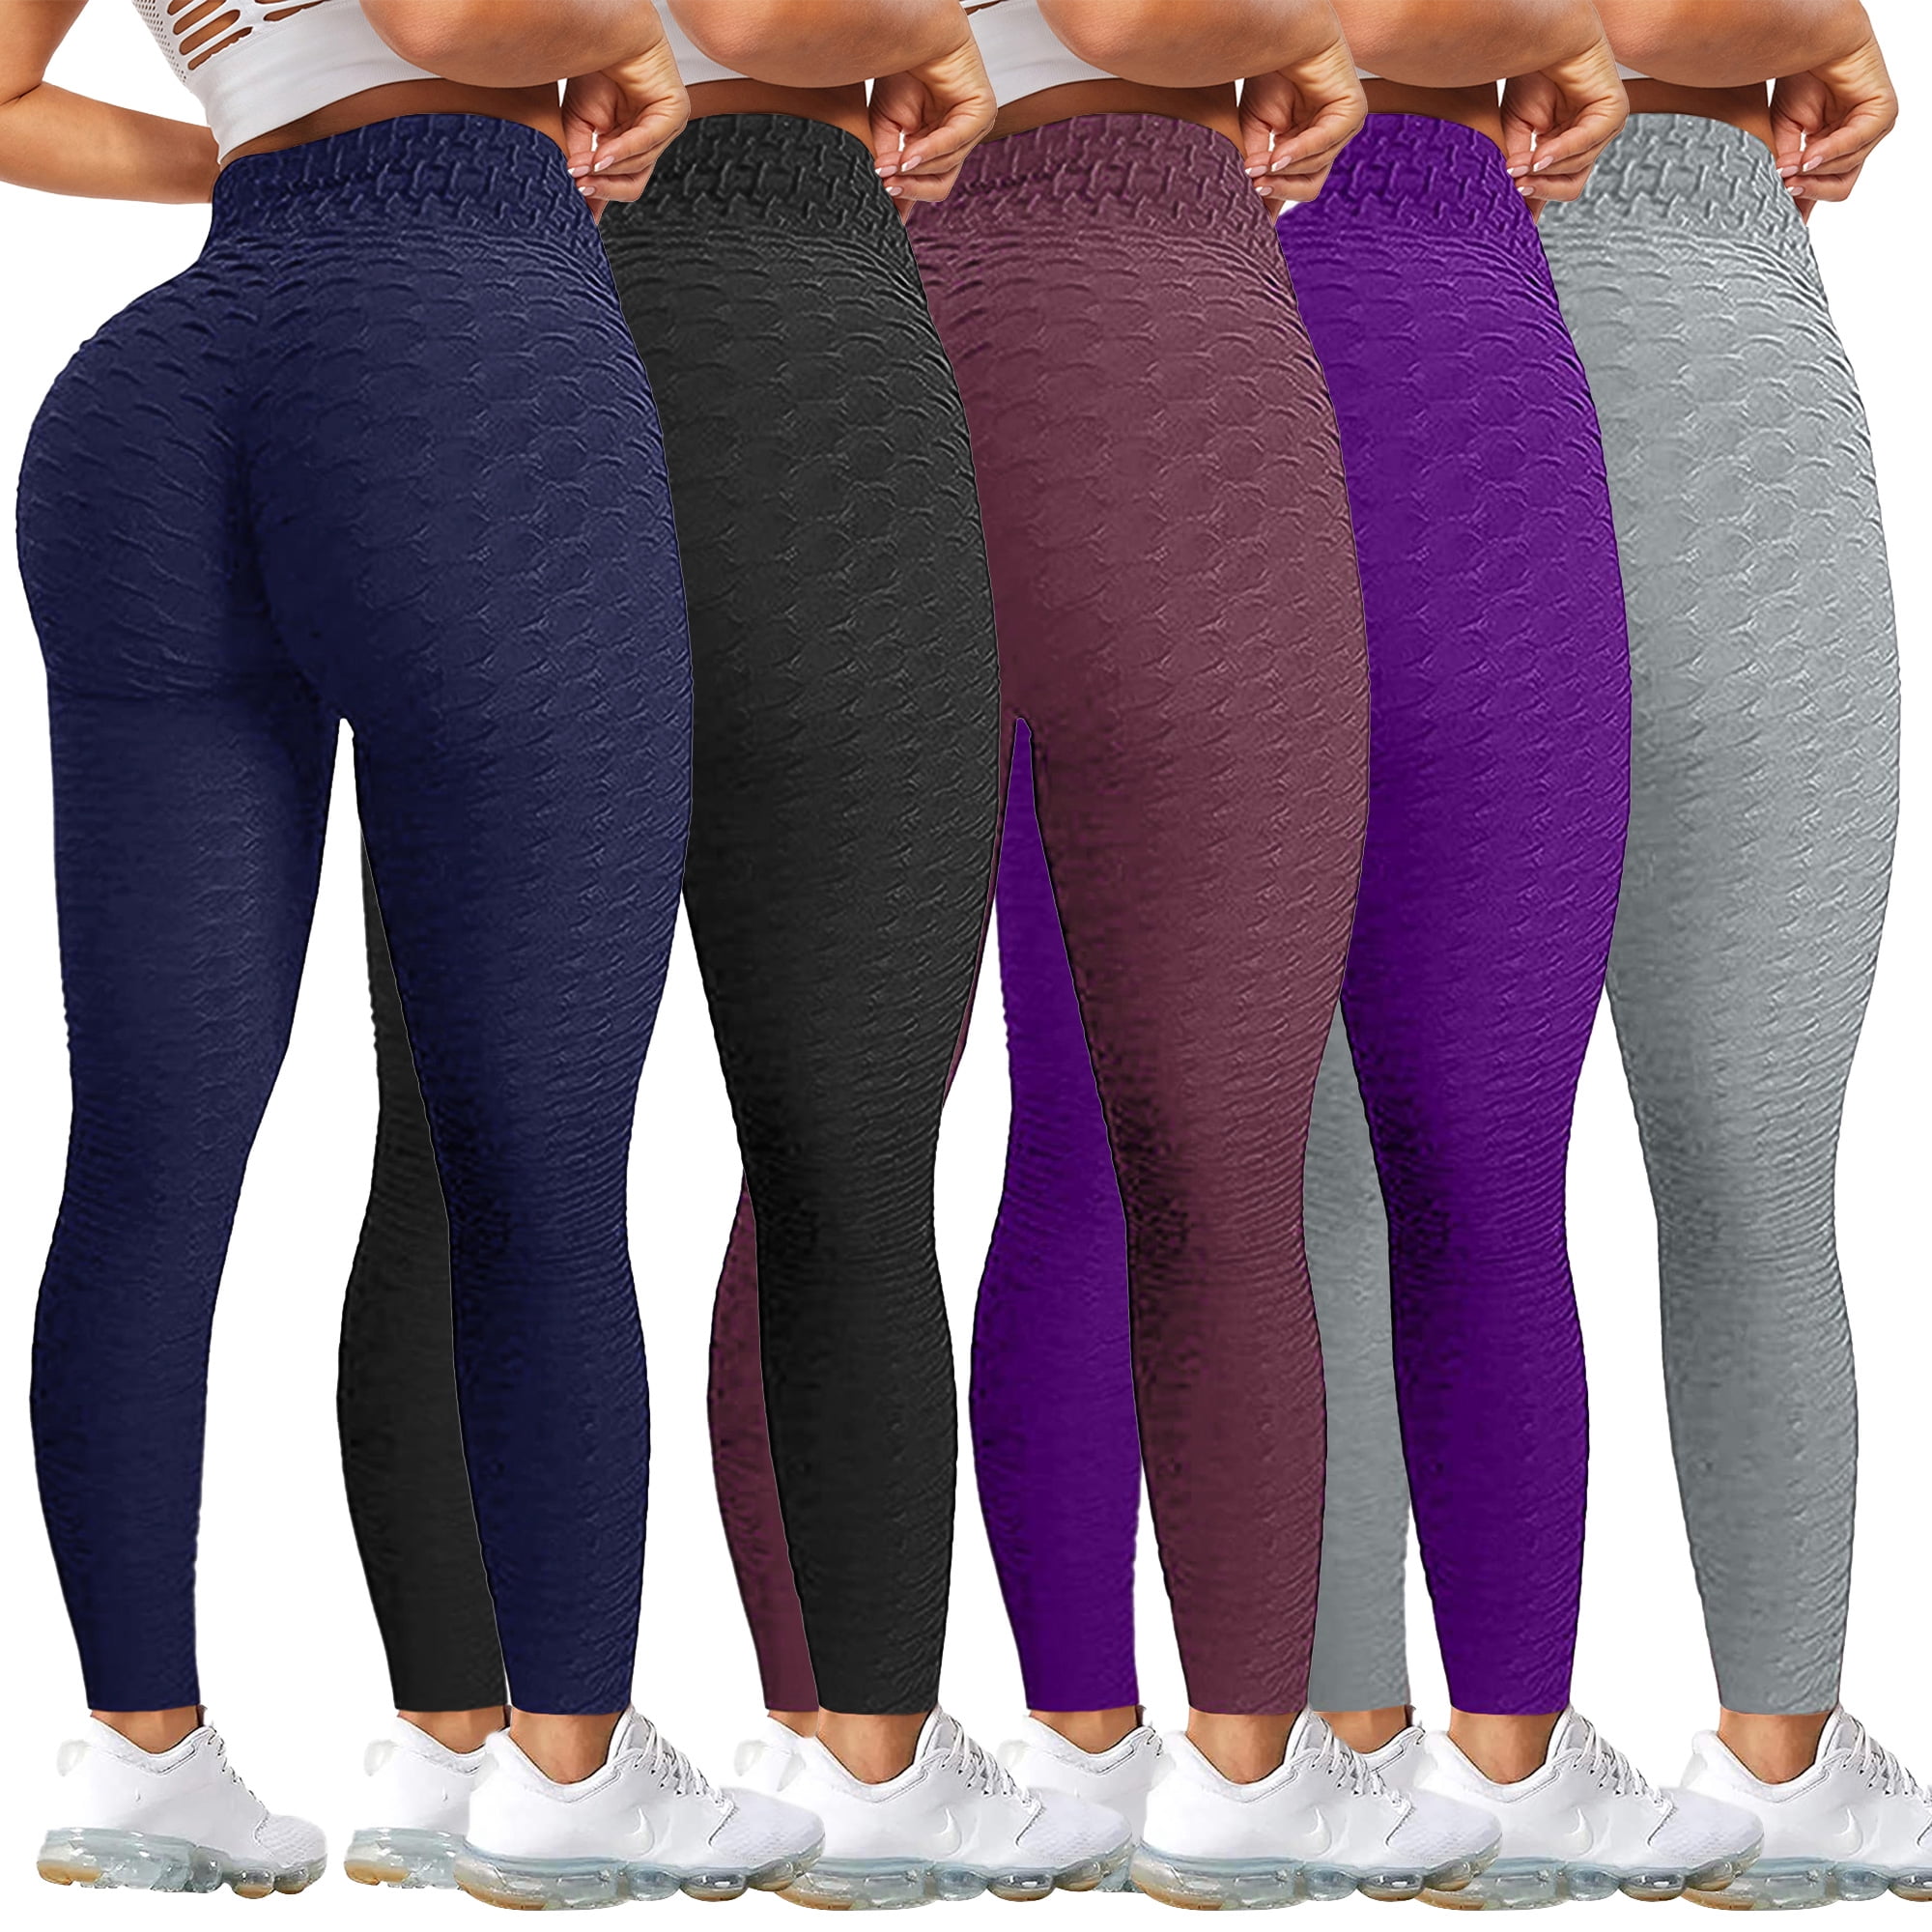 Women Anti-Cellulite Leggings Yoga Fitness Ruched Sports Butt Lift Stretch Pants 